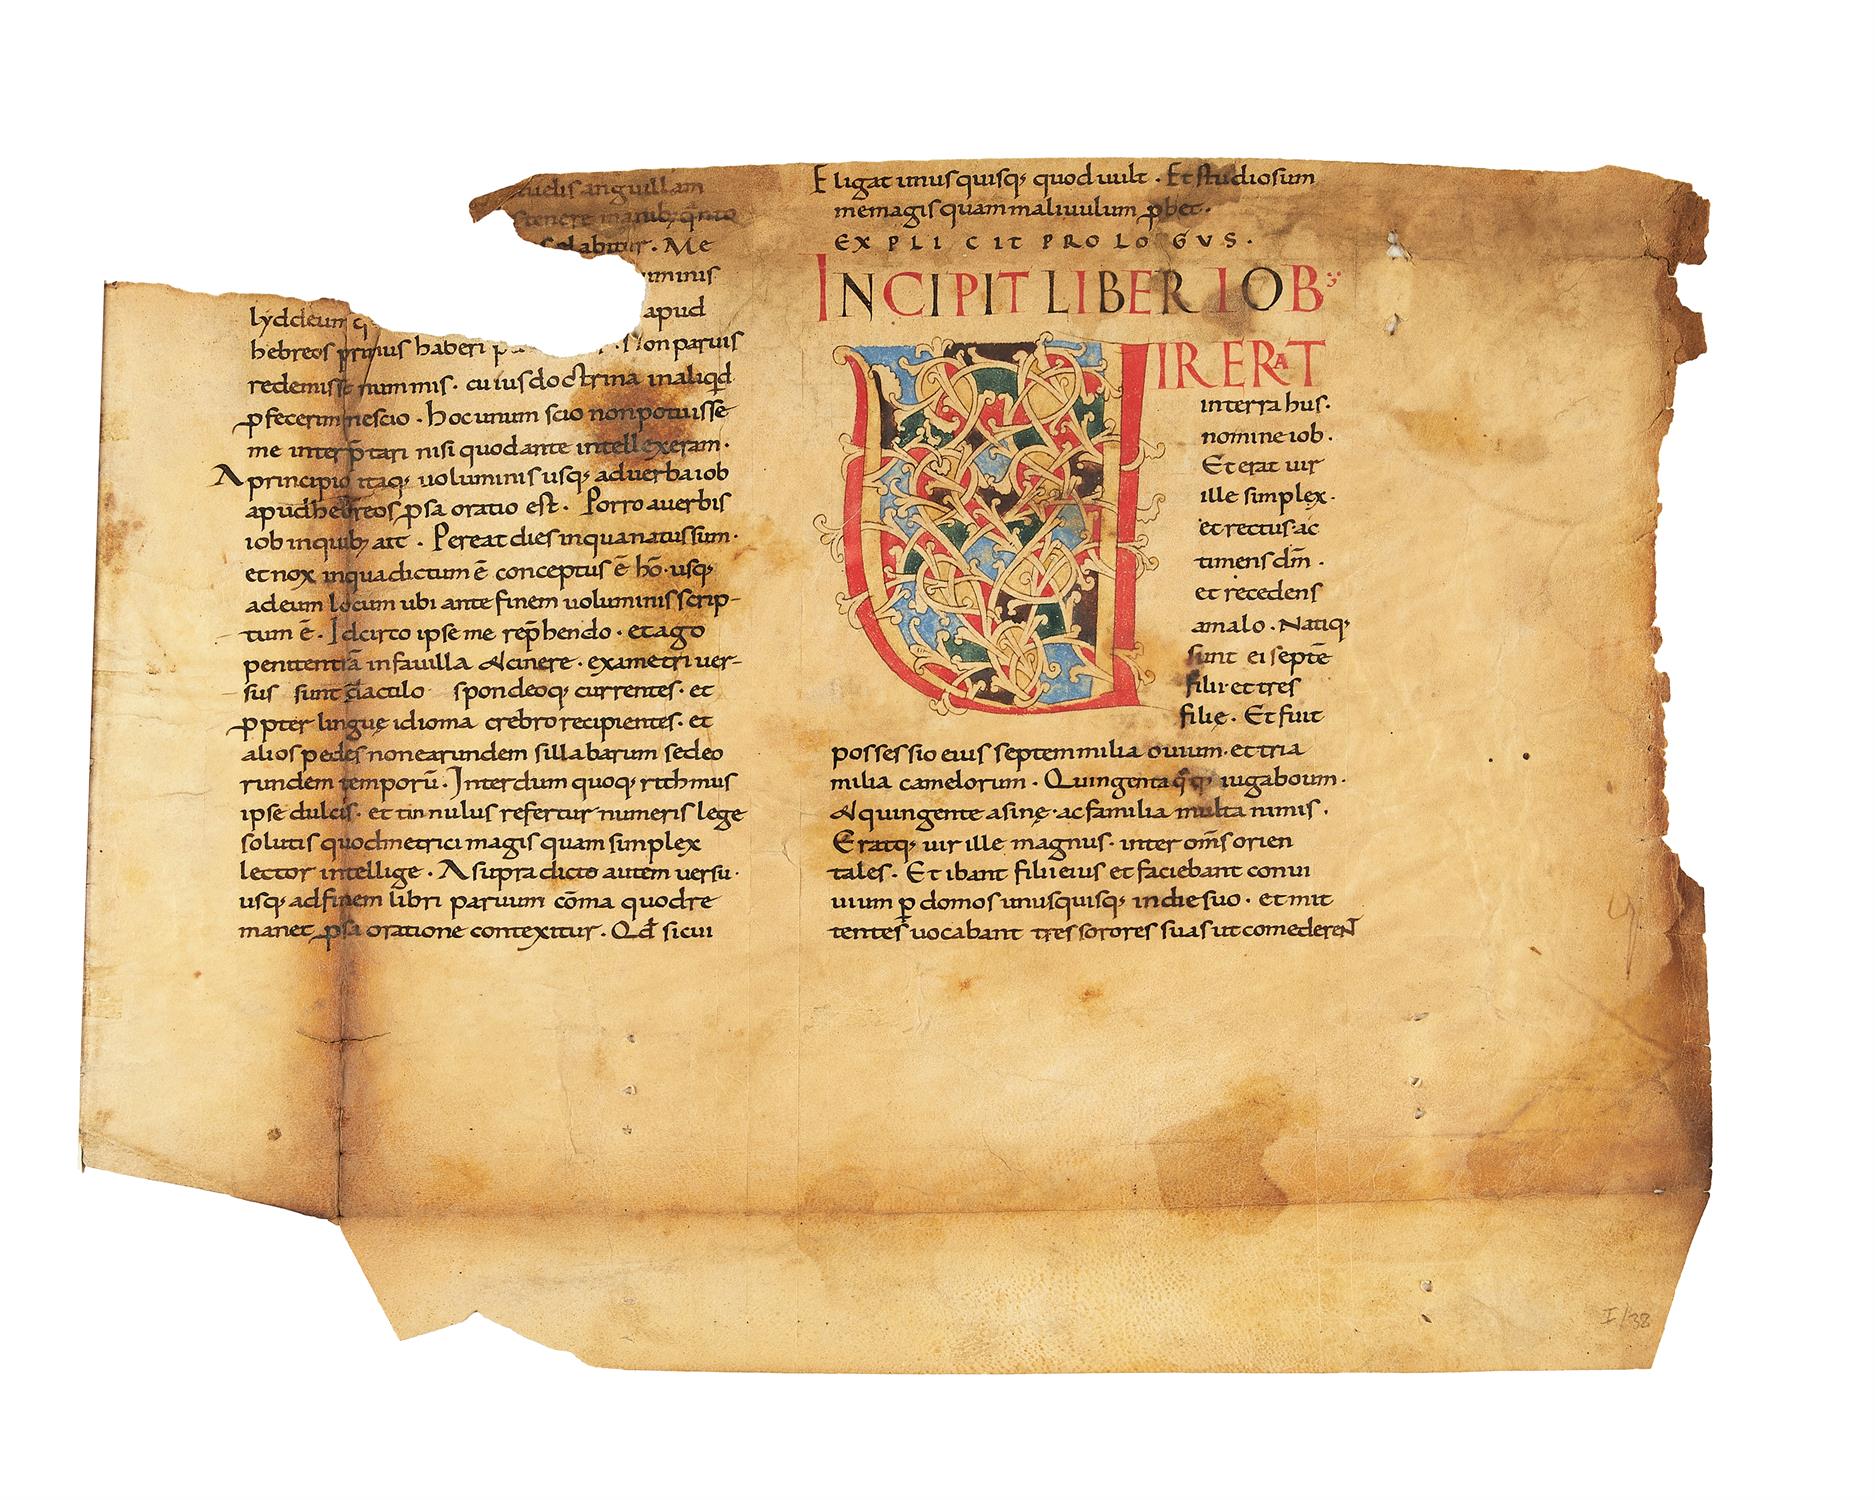 Atlantic Bible leaf with white vine initial, in Latin, manuscript on parchment [Italy, 12th century]